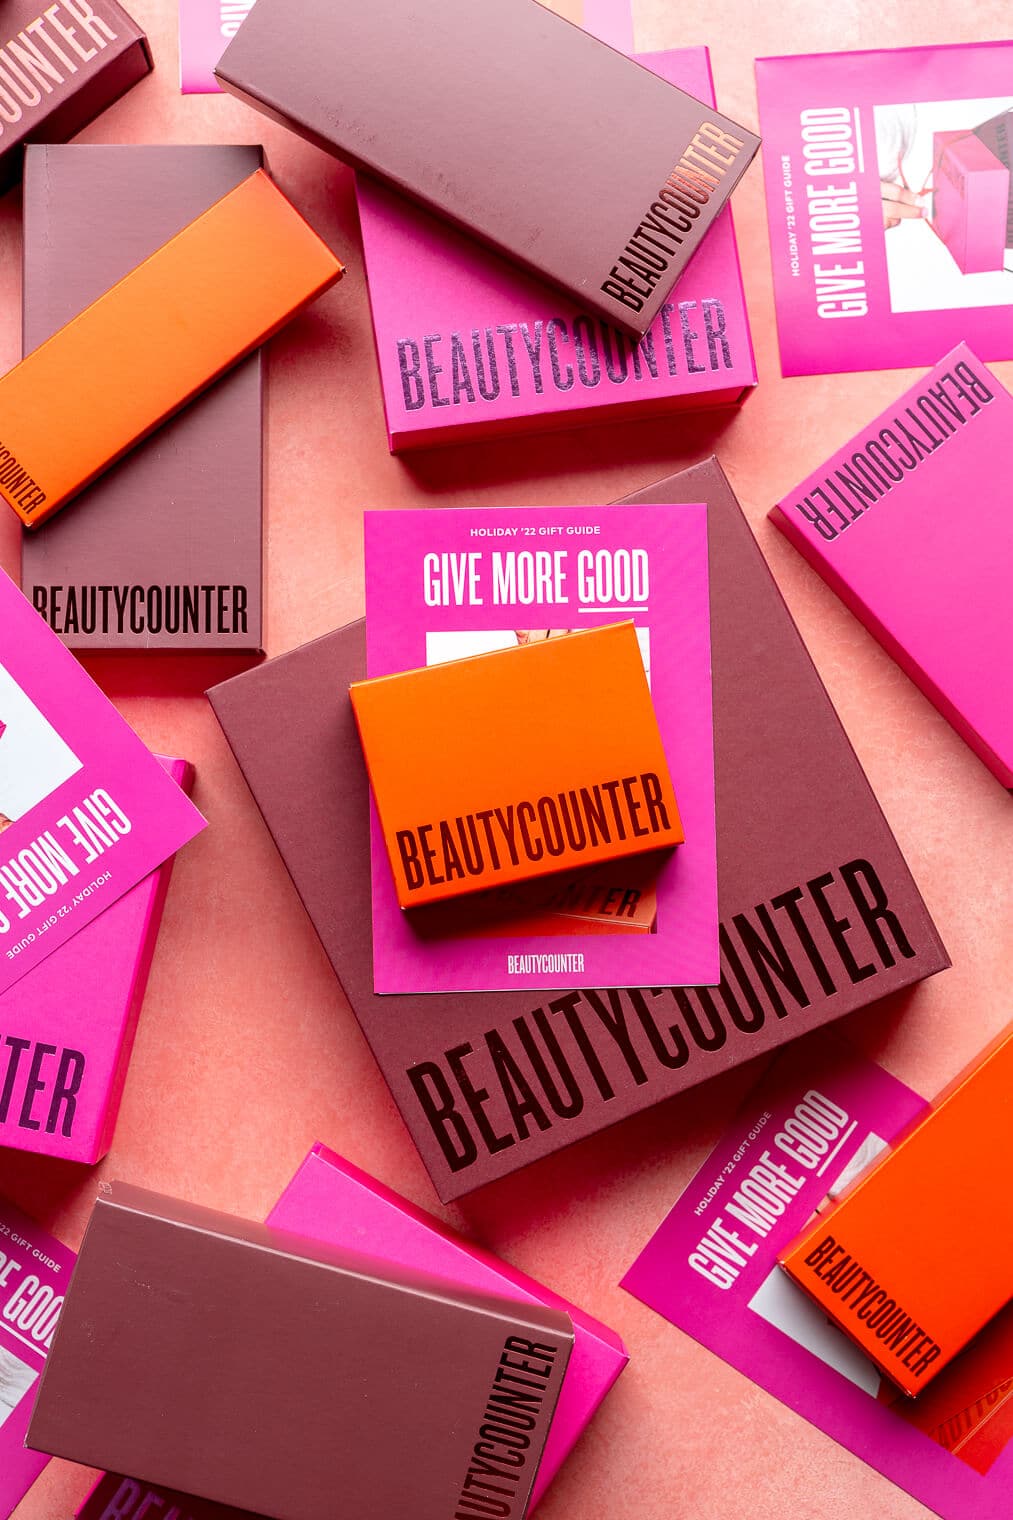 Top down view of Beautycounter limited edition sets in boxes on a pink blush surface. The boxes are of varying sizes and are maroon, red, and bright fuchsia in color.